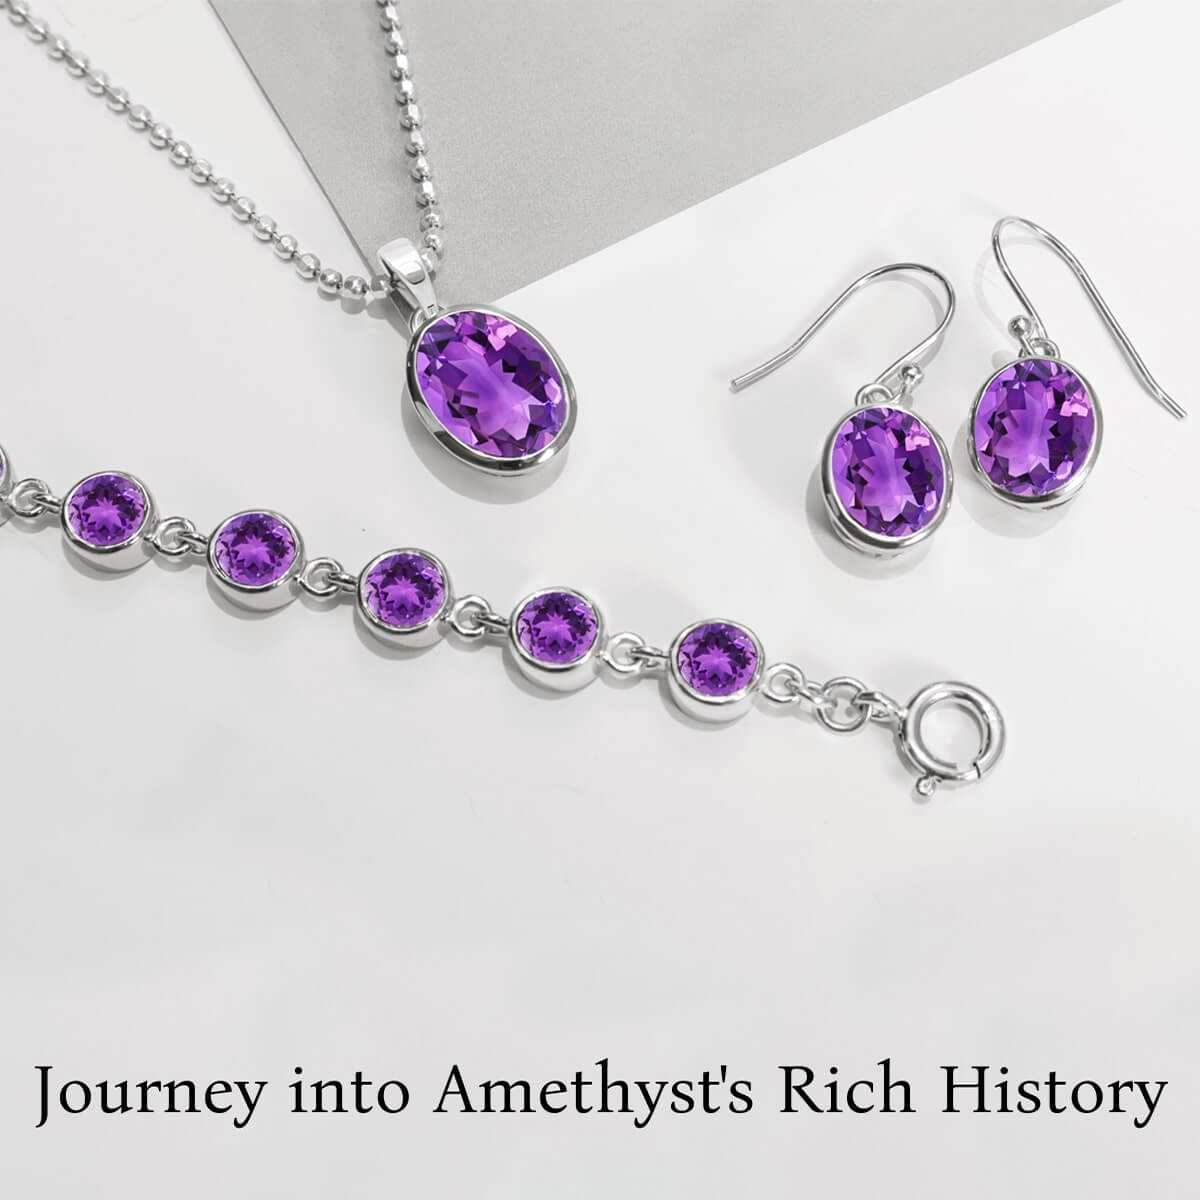 Amethyst Meaning, Symbolism, History, Healing Properties